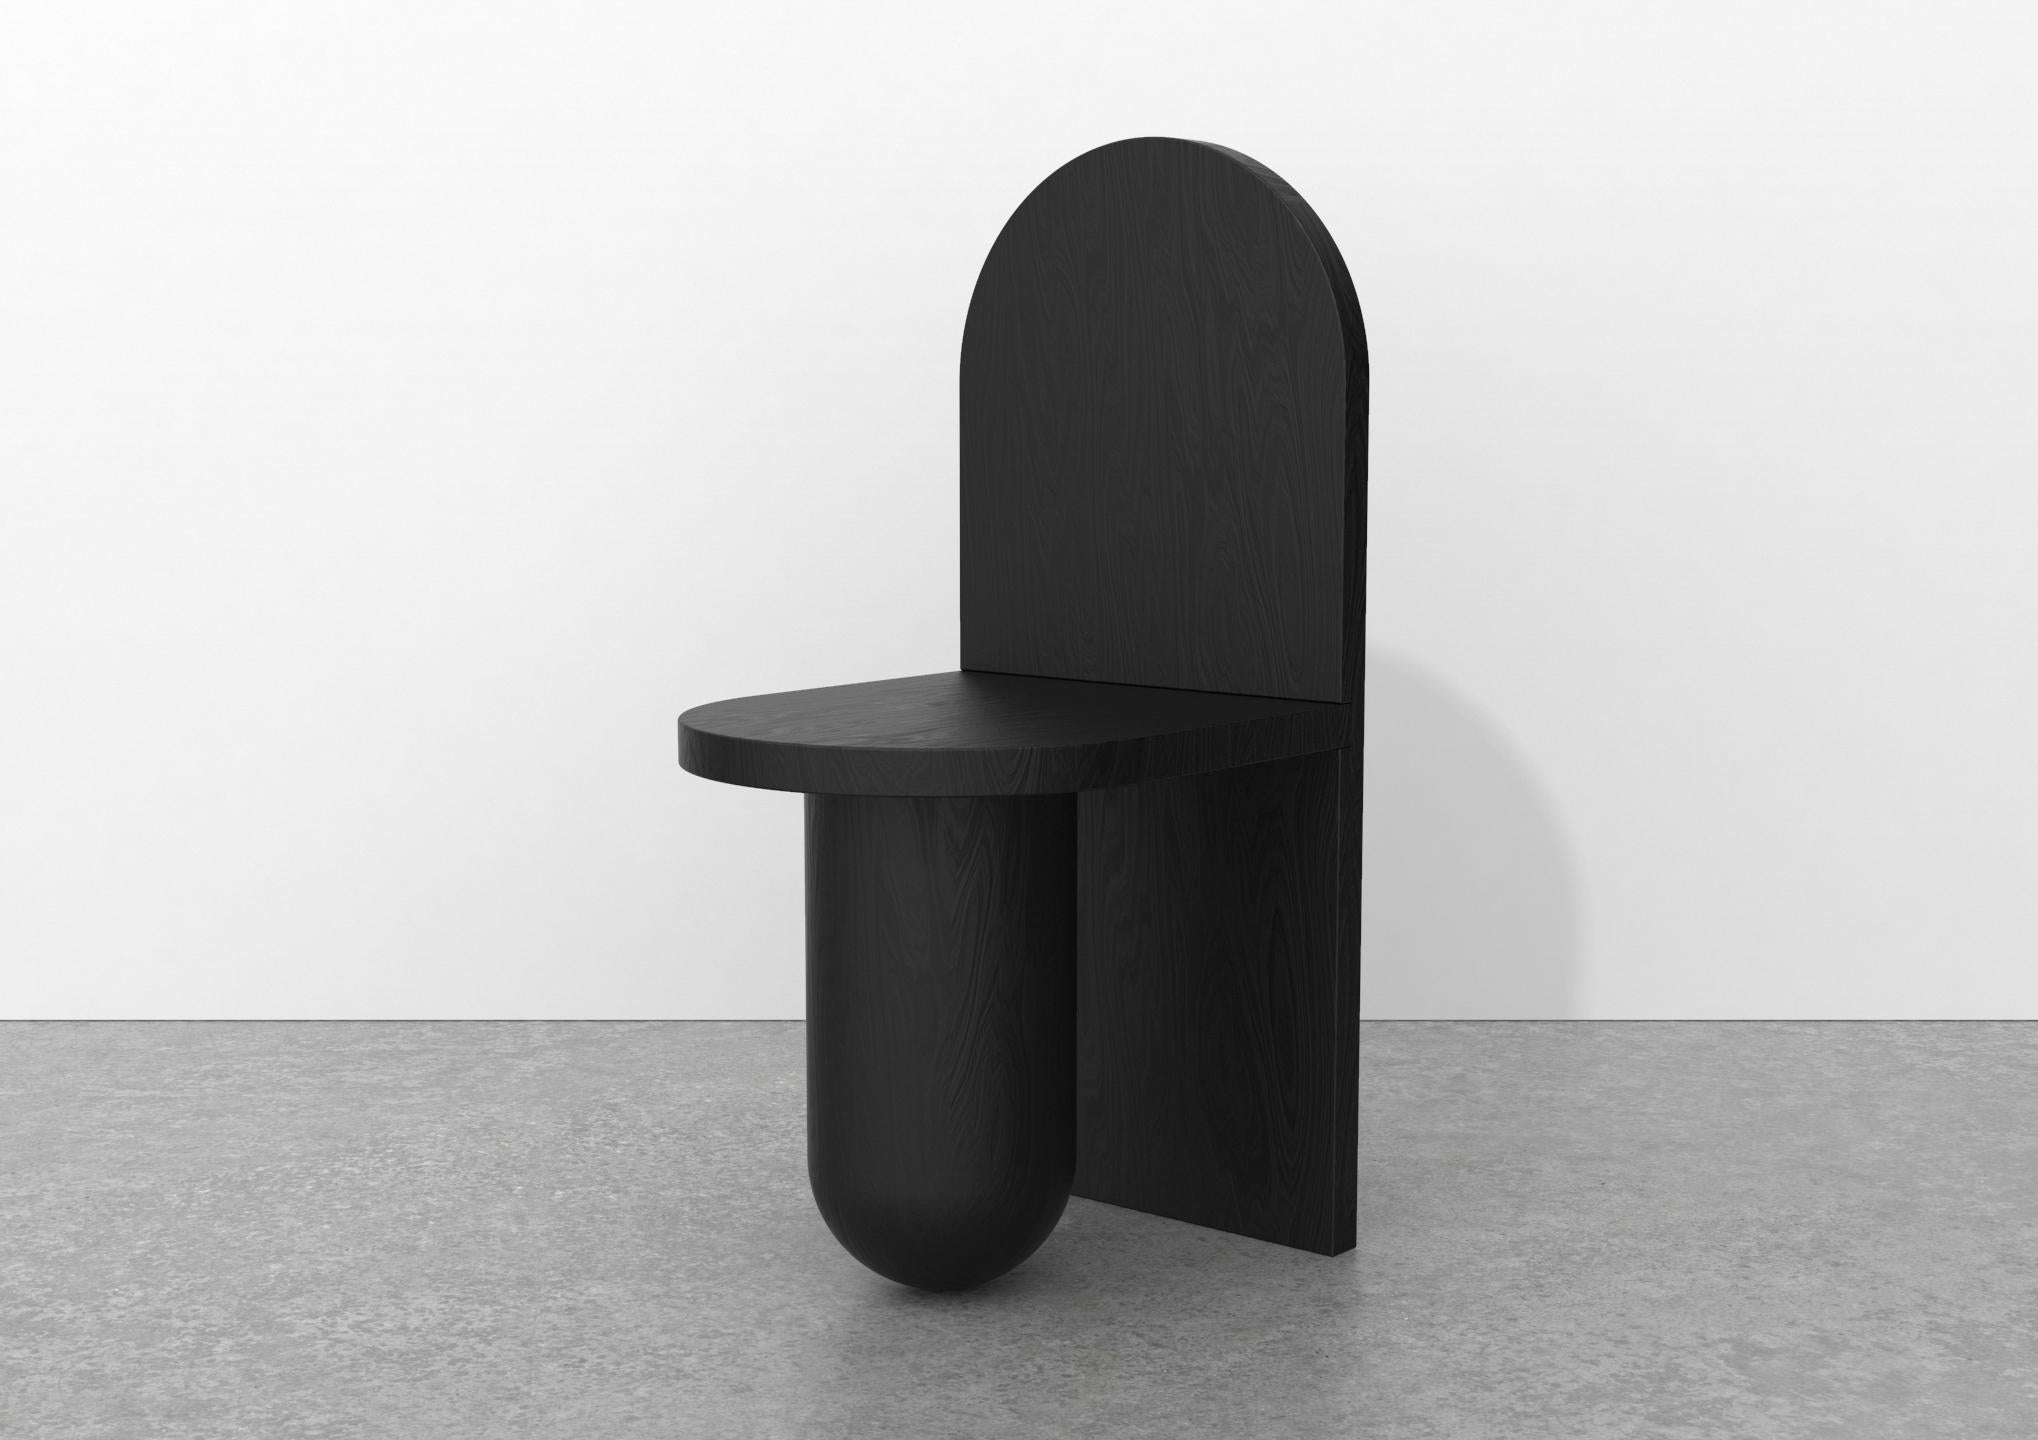 By Ming Keng Lu

The moment is commemorated in an implicit form with a reverence for the past. In the process of sweeping graves, Ming ken Lu always felt he had to record something for this thought. The result is this minimalist chair in black